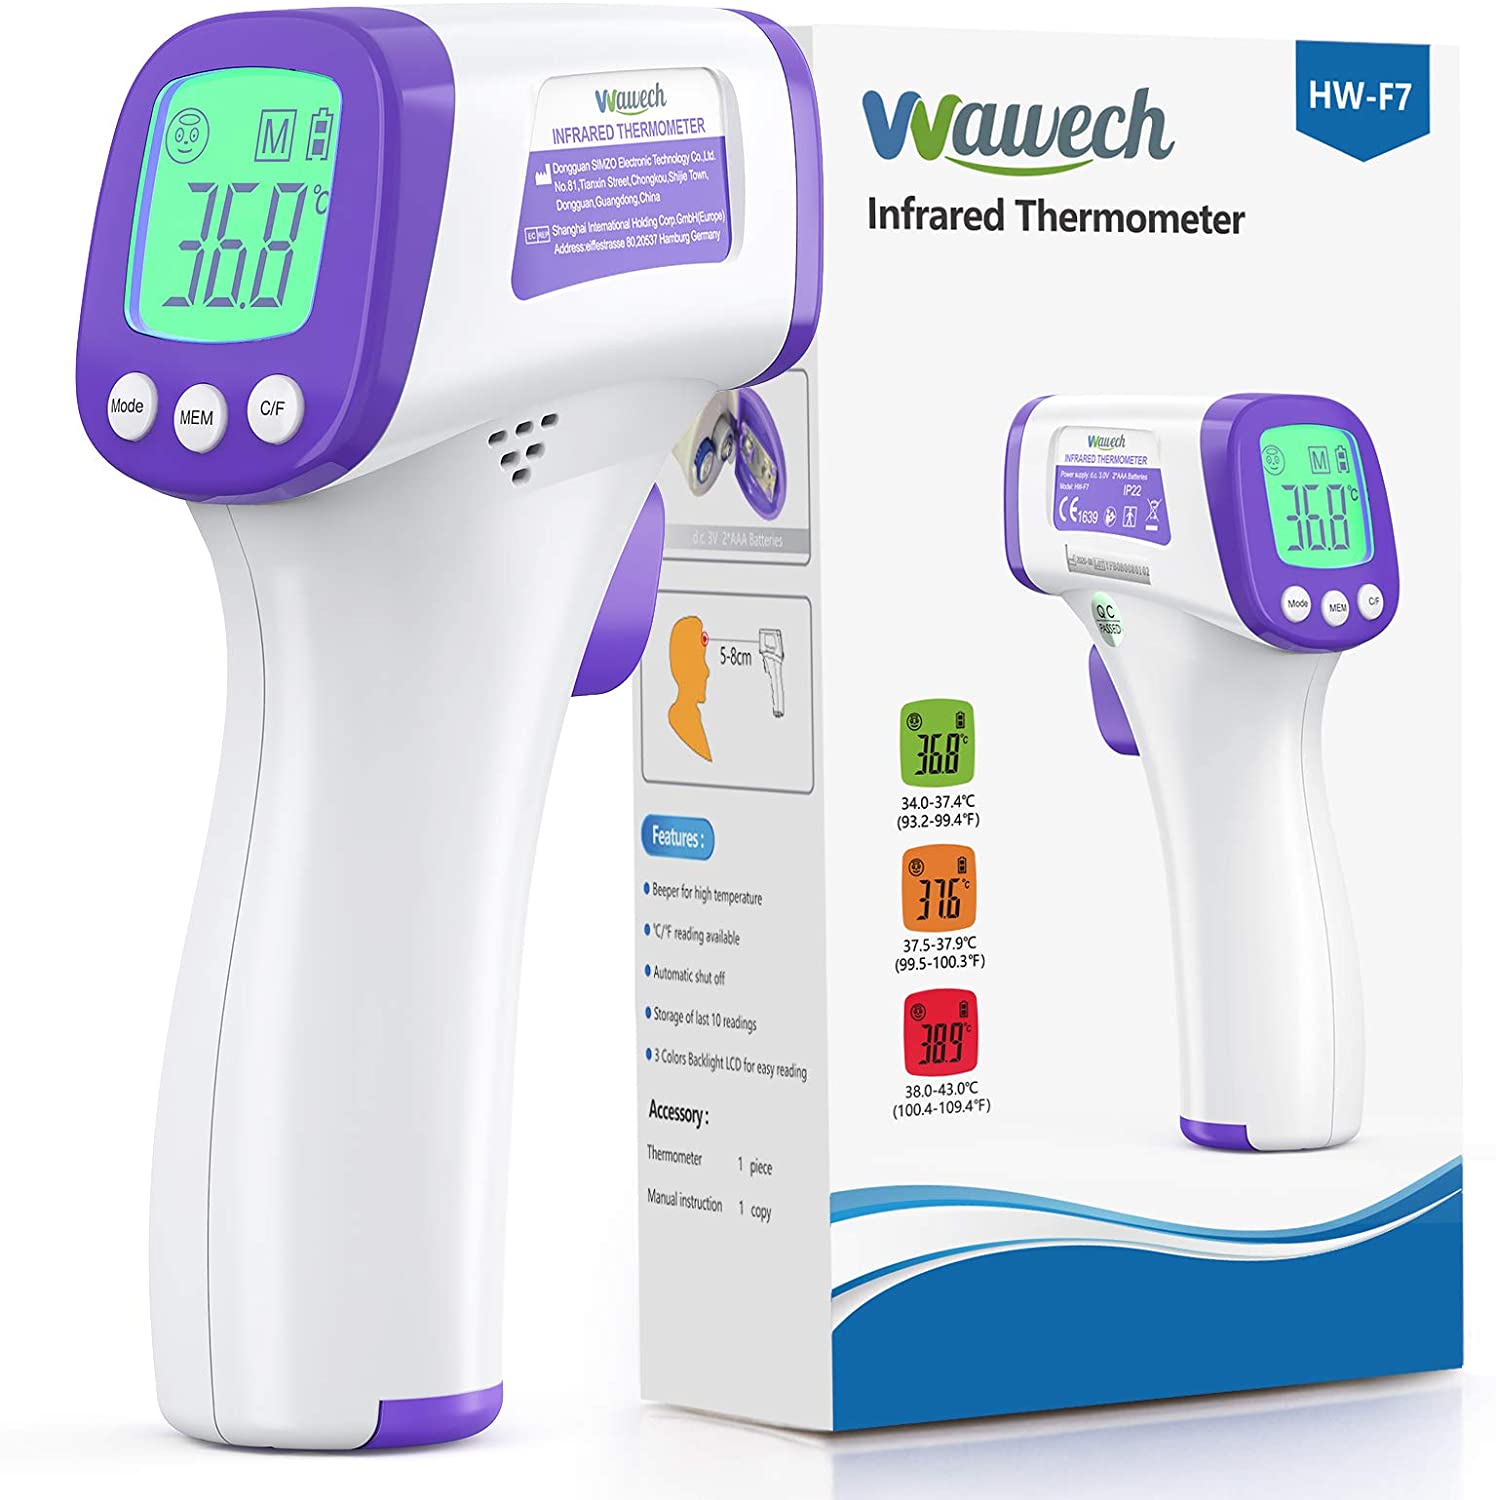 Wawech Thermomètre Frontal, Thermomètre Médical Frontal avec Affichage LCD